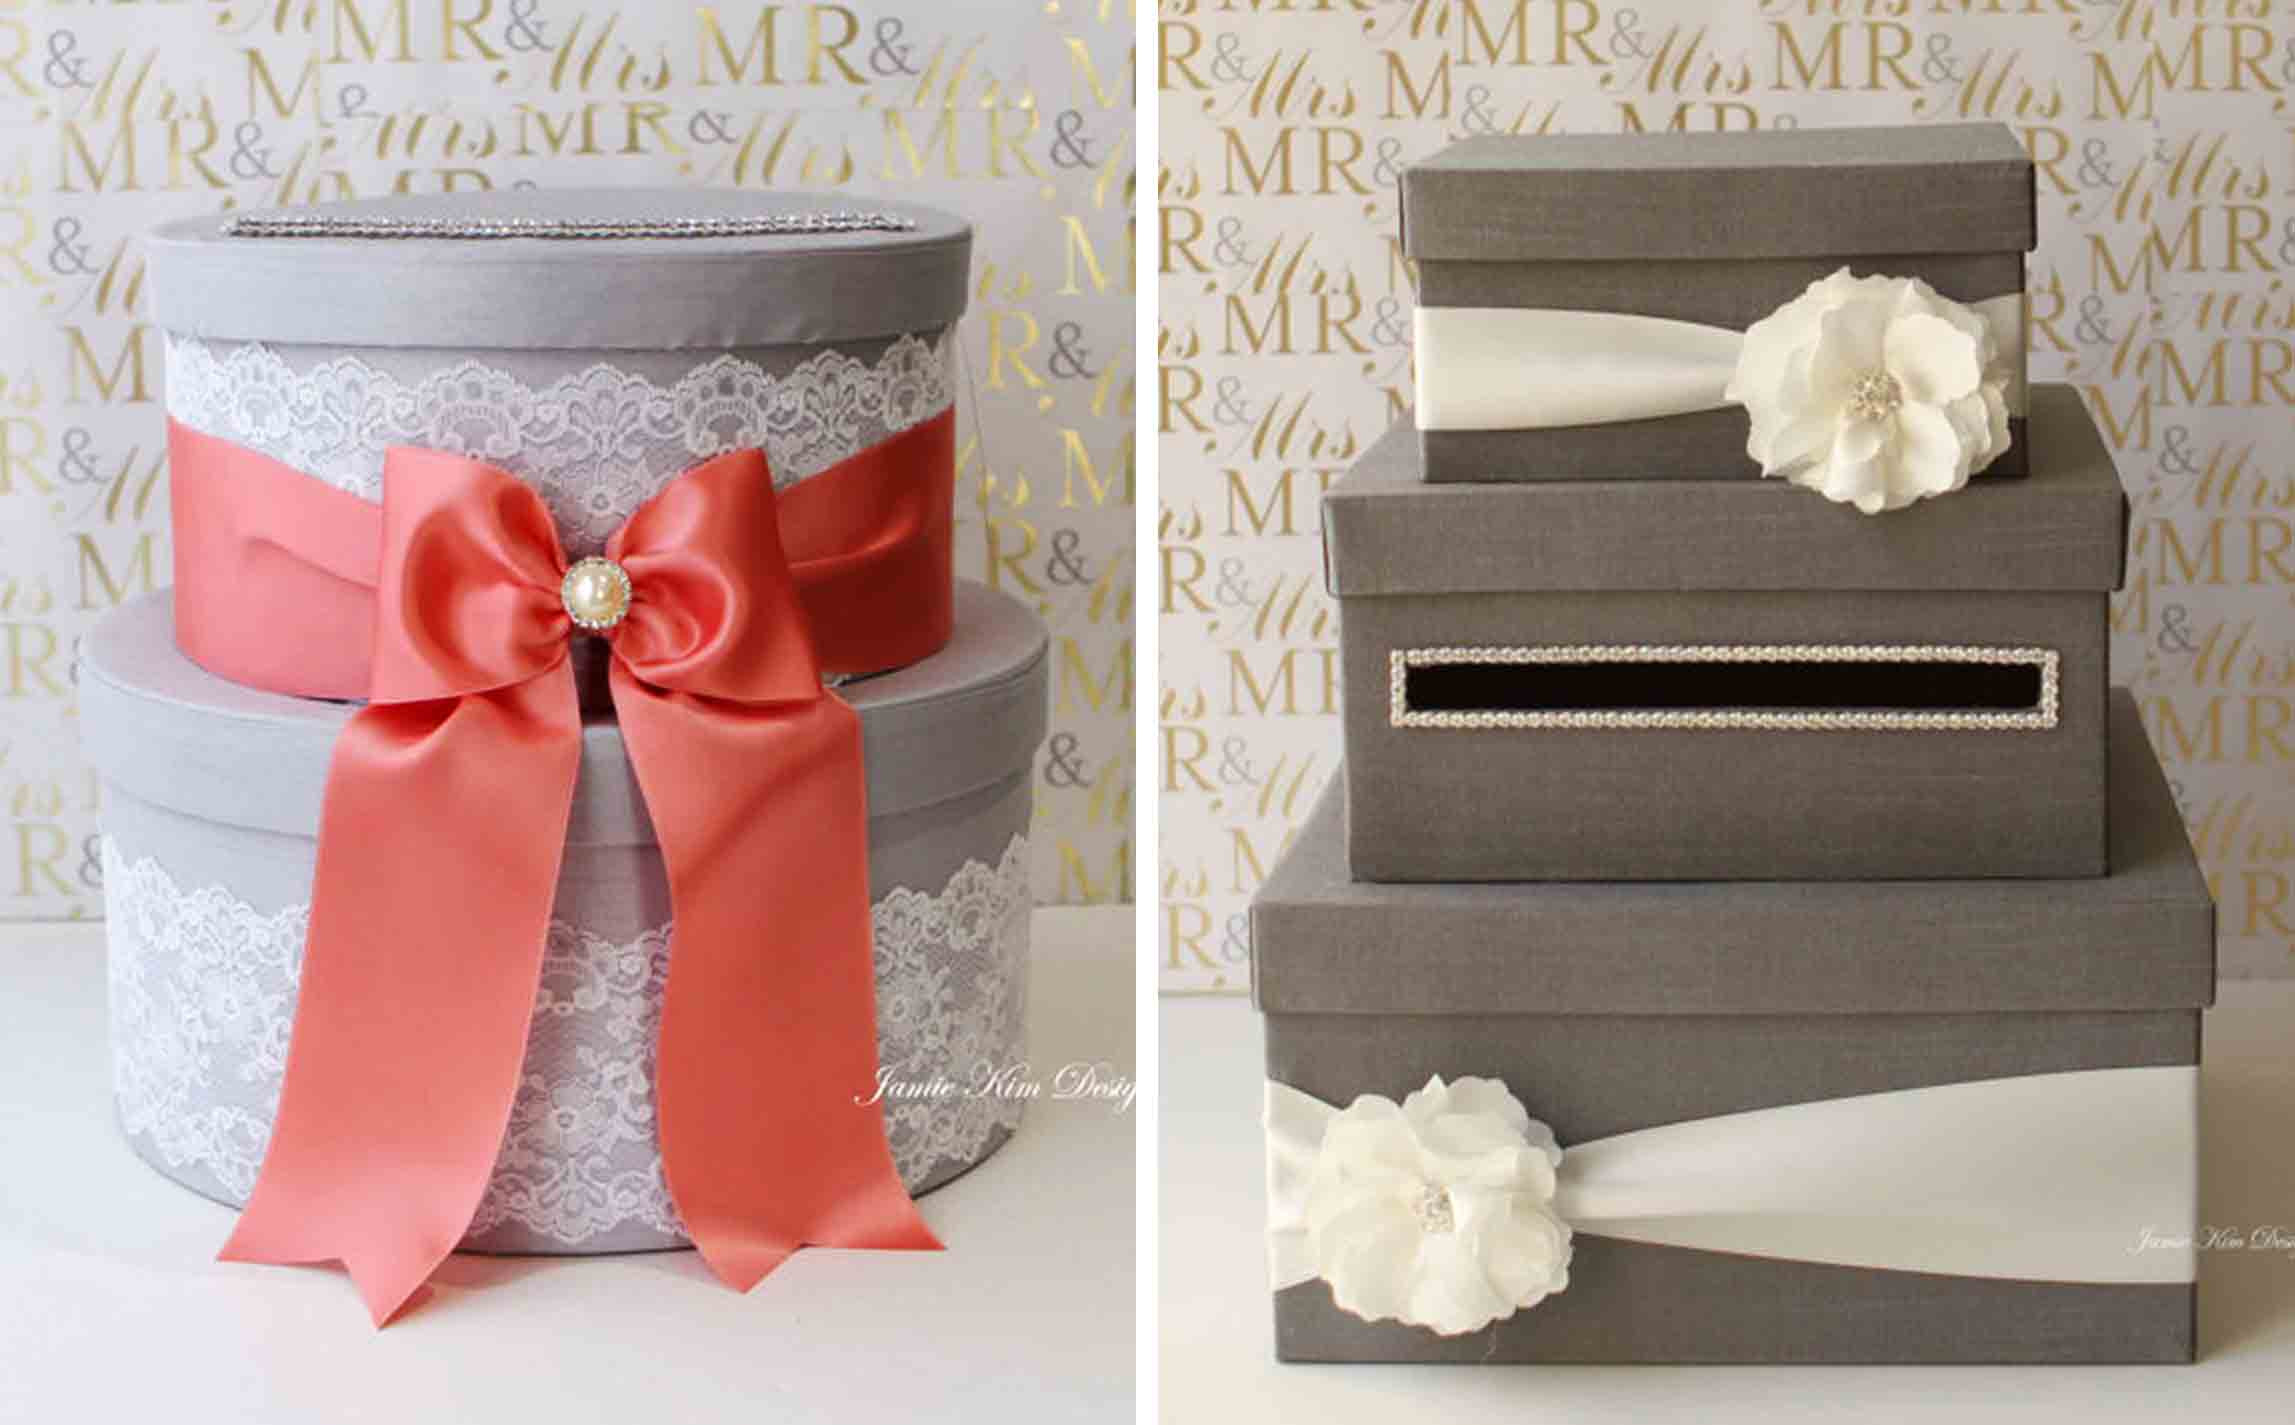 DIY Card Boxes Wedding
 18 DIY Wedding Card Boxes For Your Guests To Slip Your